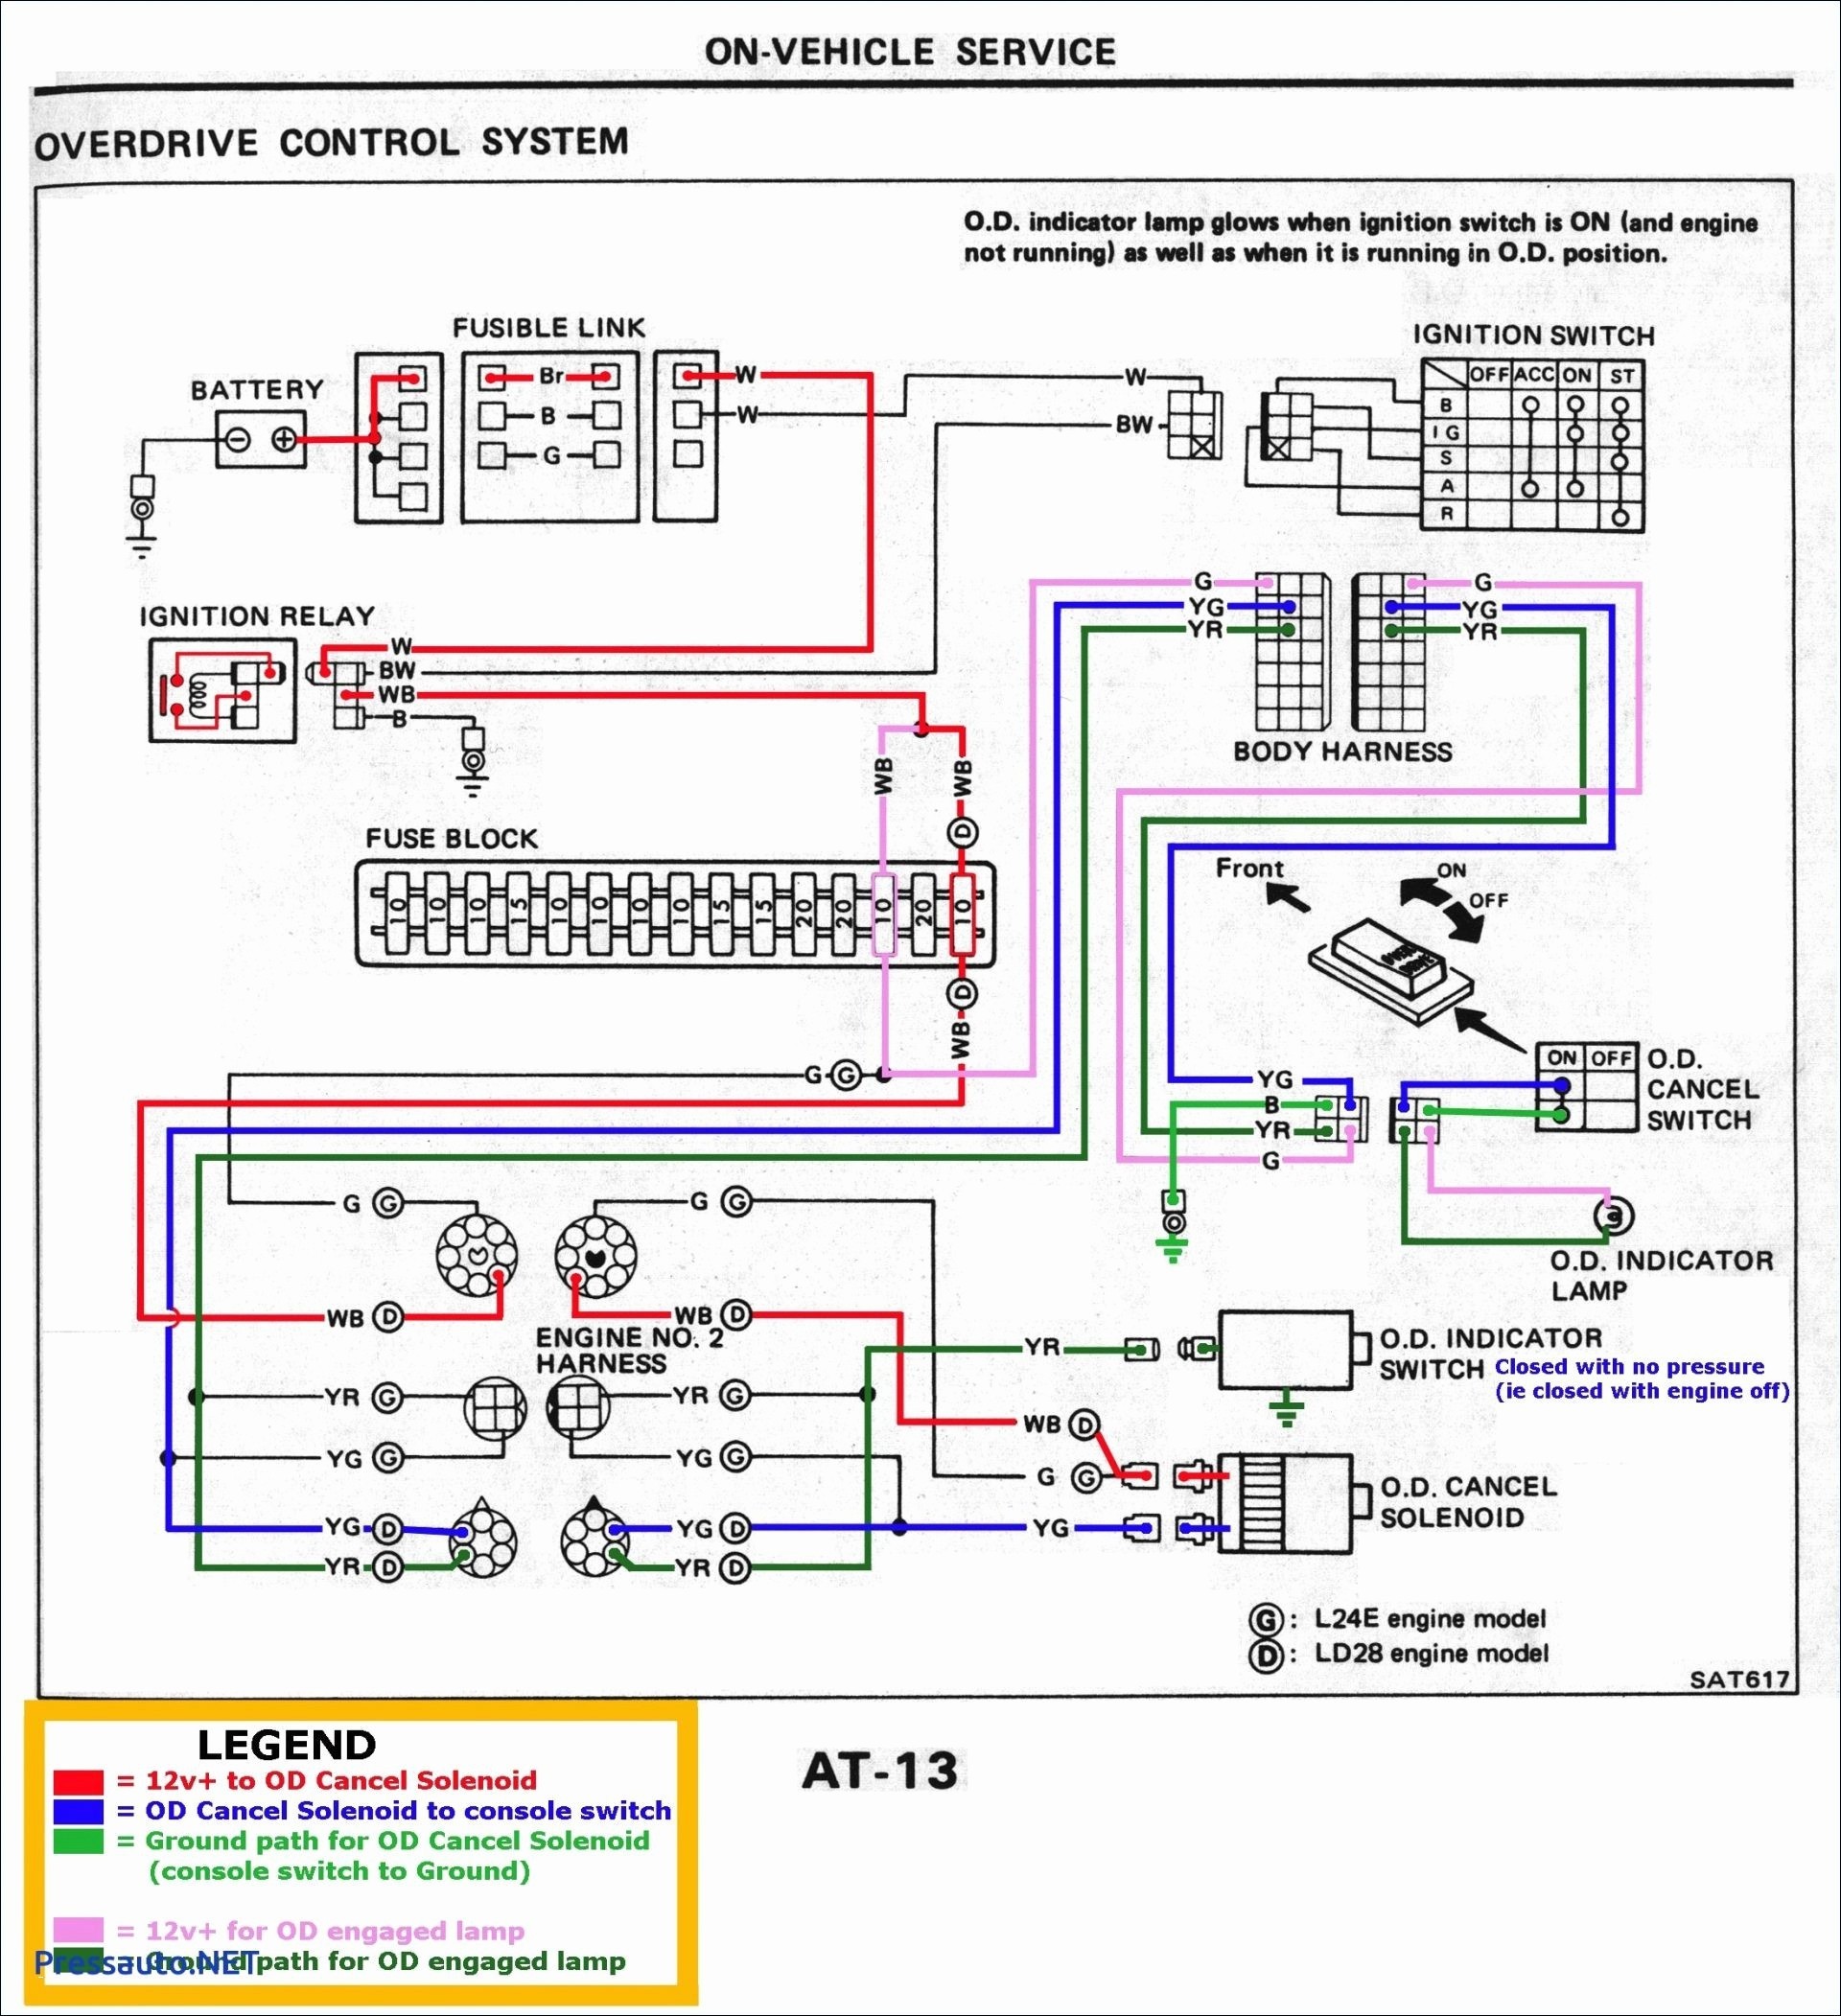 Wiring Diagram for Two Doorbells Inspirationa Wiring Diagram Doorbell Wiring Diagram Best How to Install A